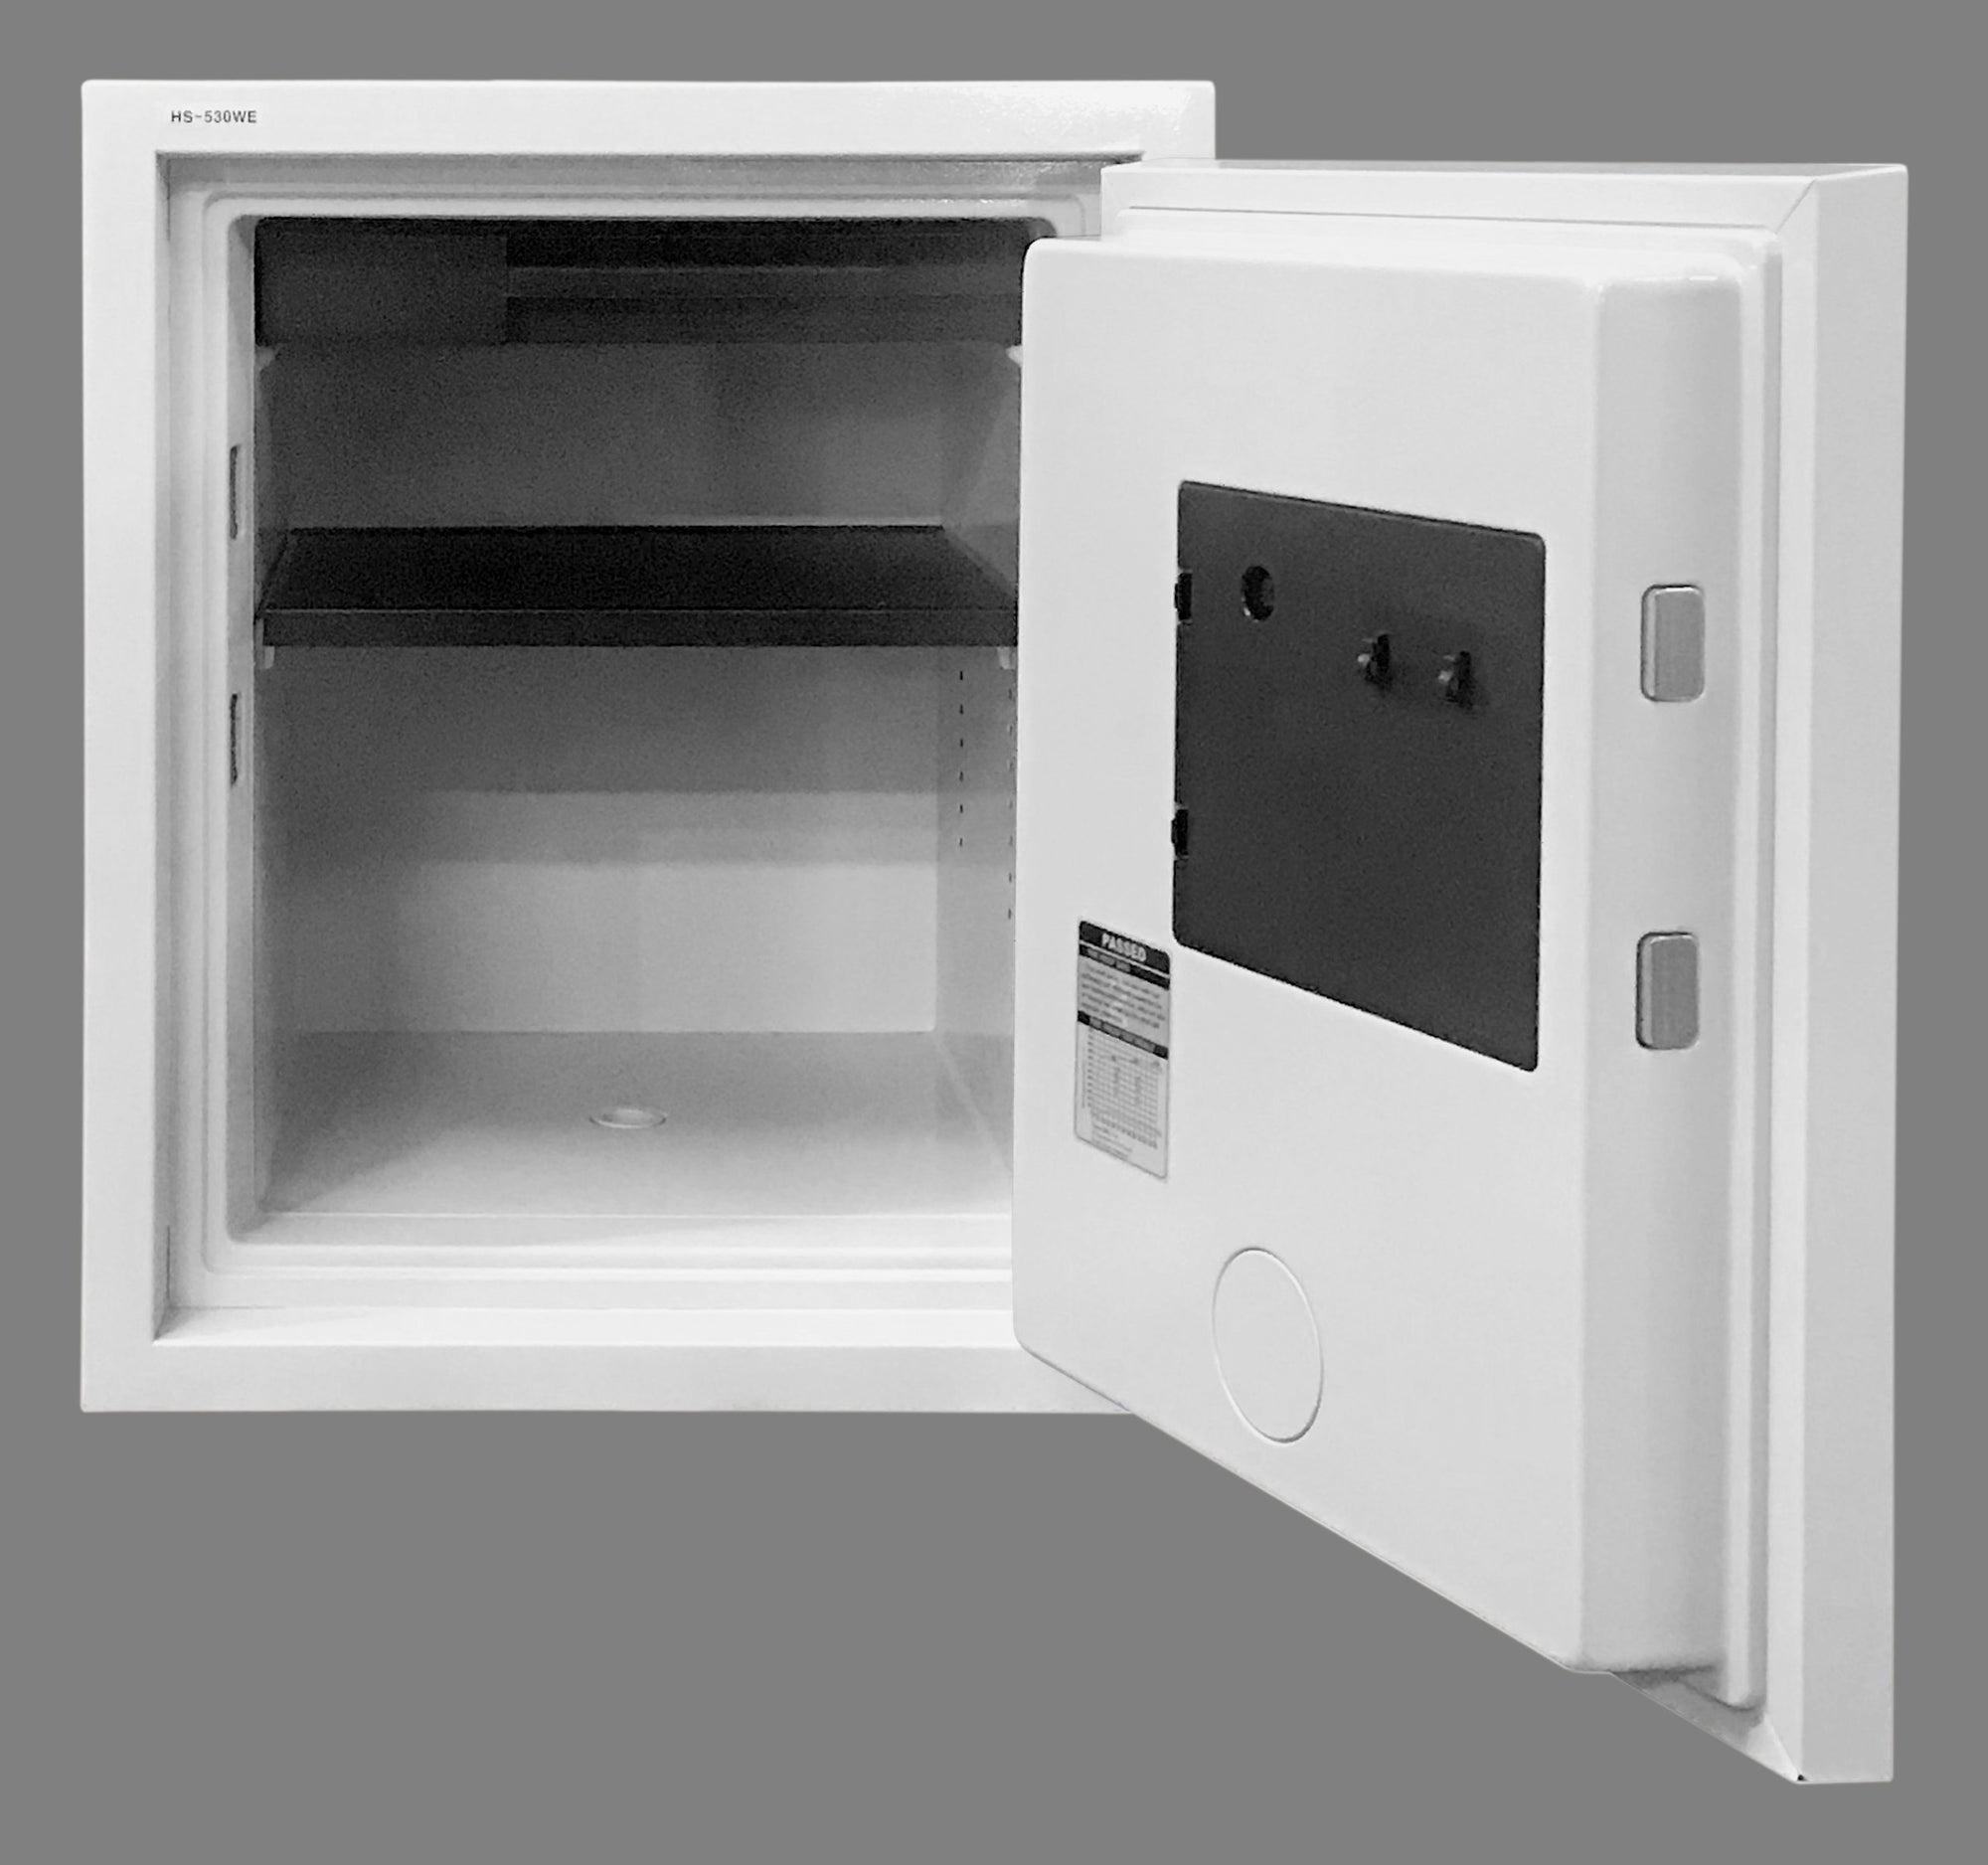 Fireproof Safes & Waterproof Chests - Hollon HS-530WD 2 Hour Home Safe With Mechanical Lock